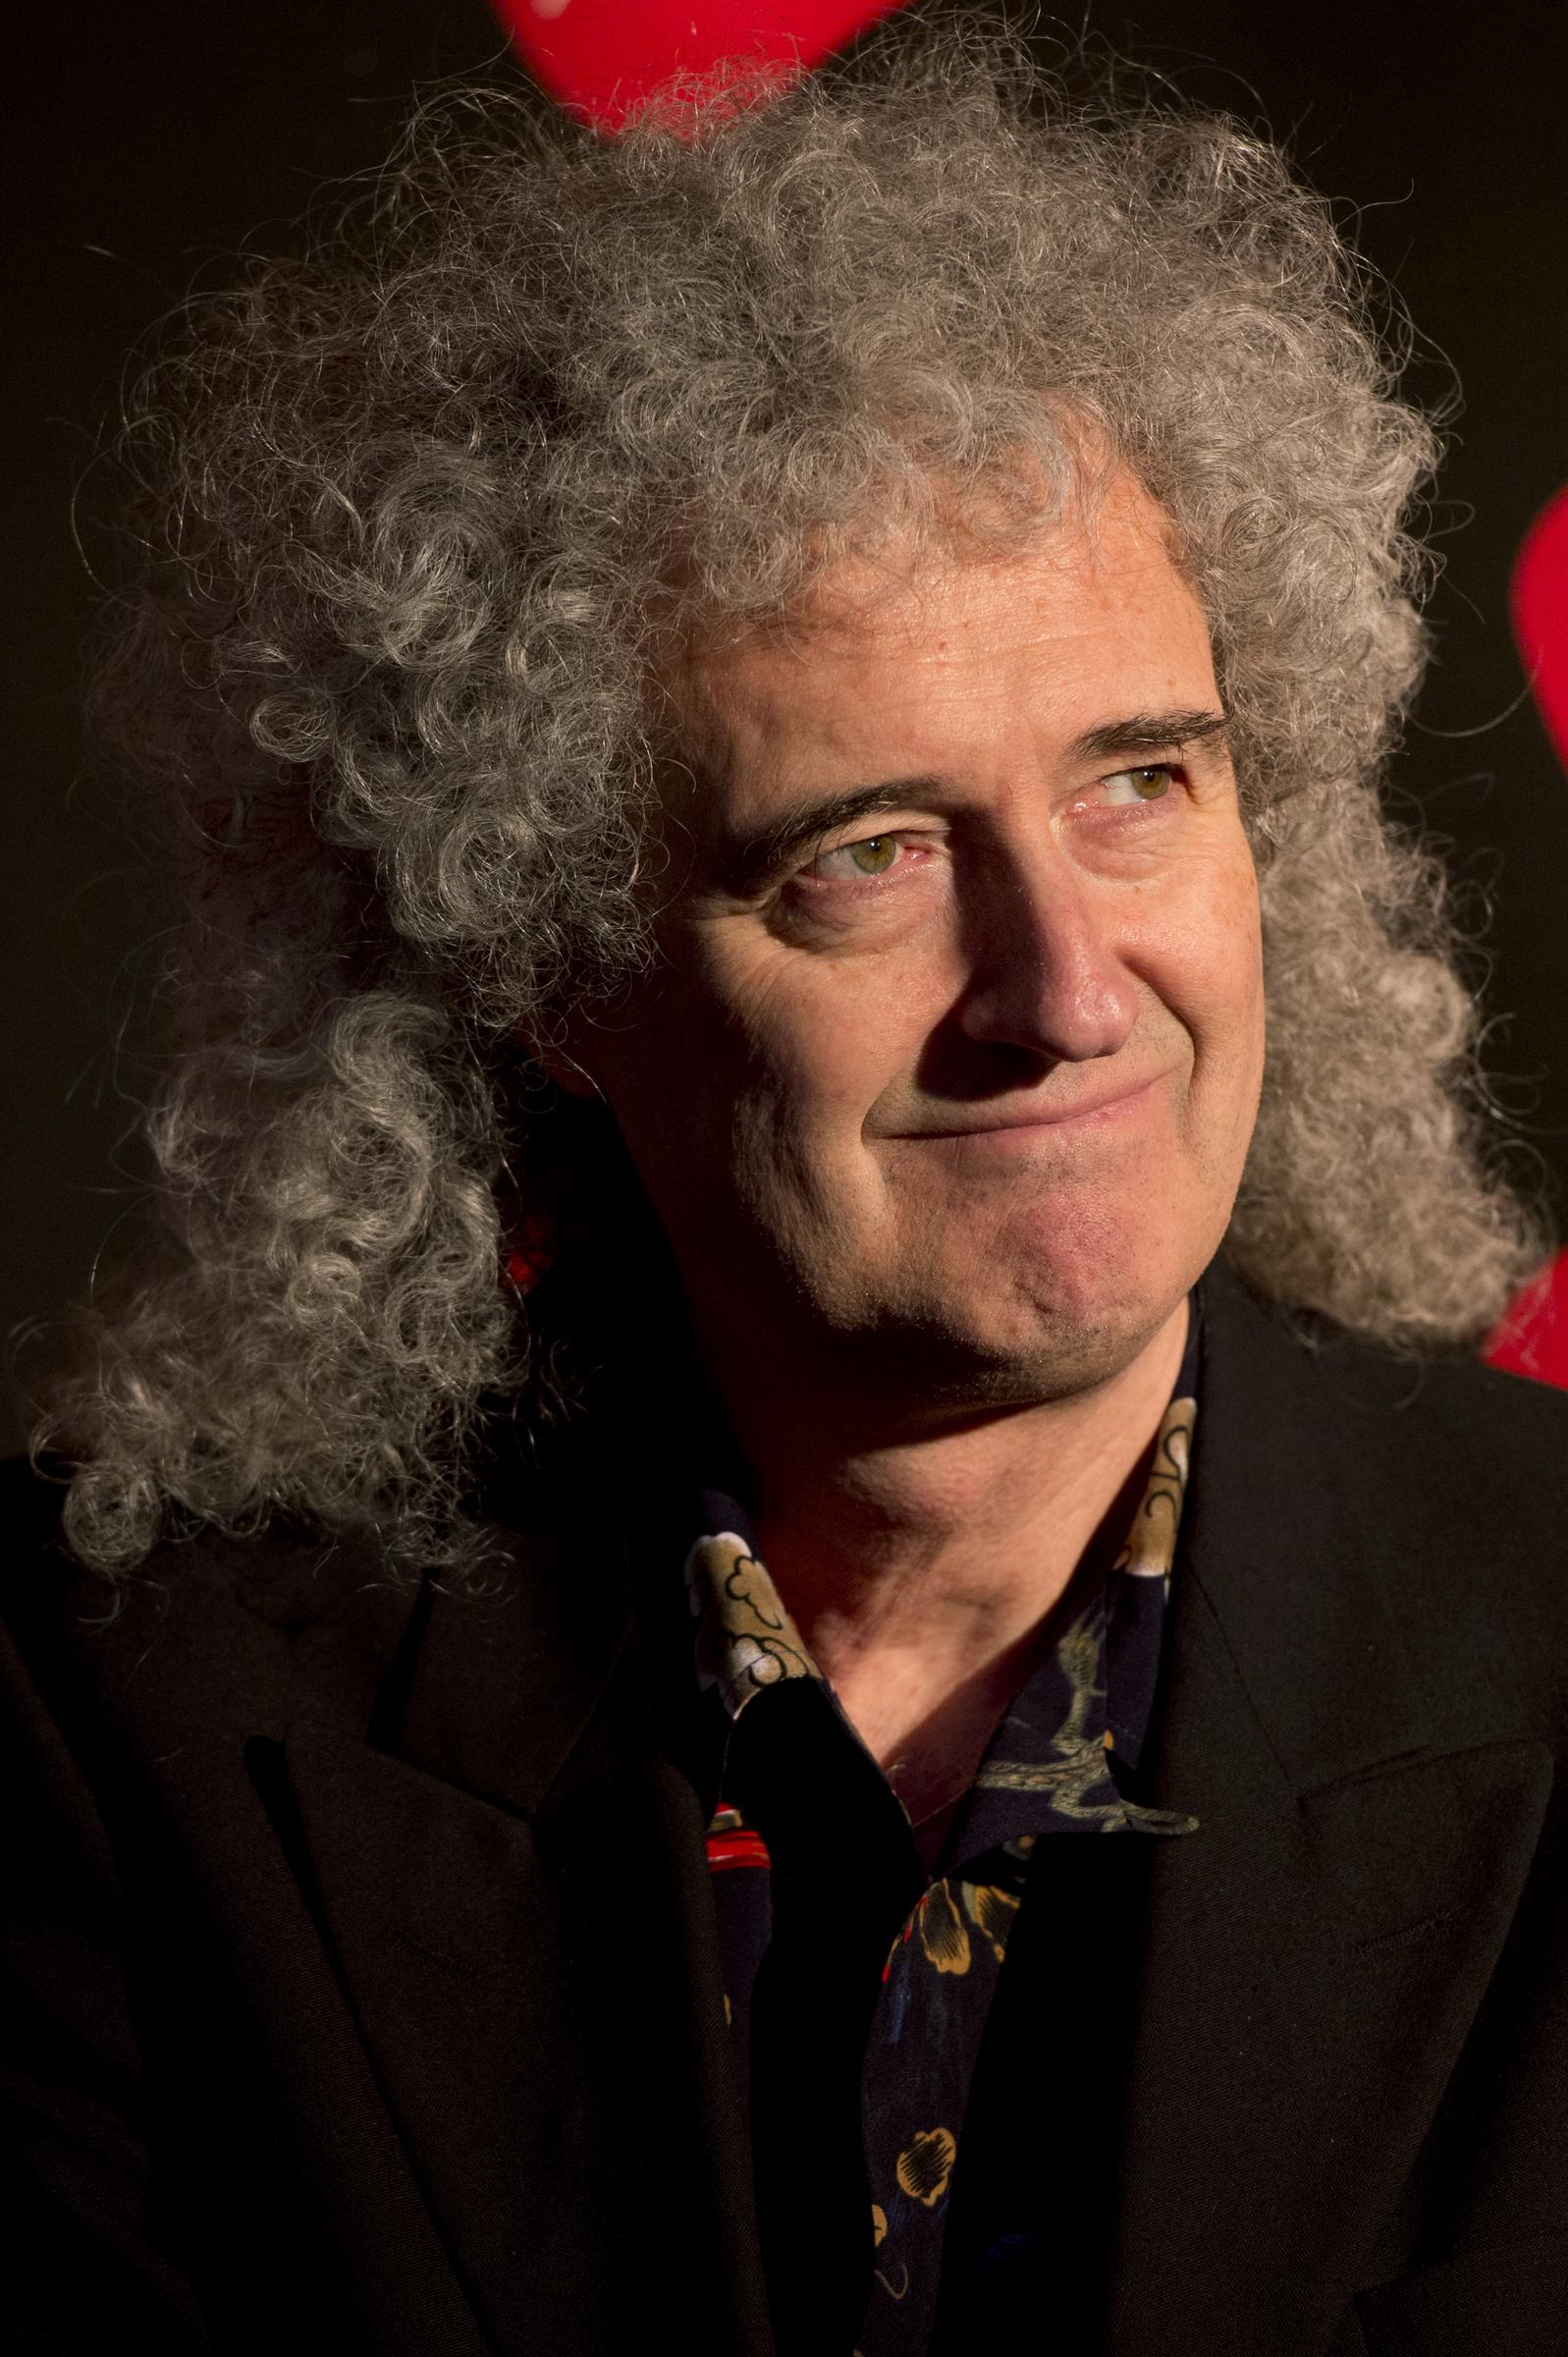 Brian May, attends a ceremony in which Queen were awarded the PRS for Music Heritage Award at Imperial College London in London on March 5, 2013. | Source: Getty Images